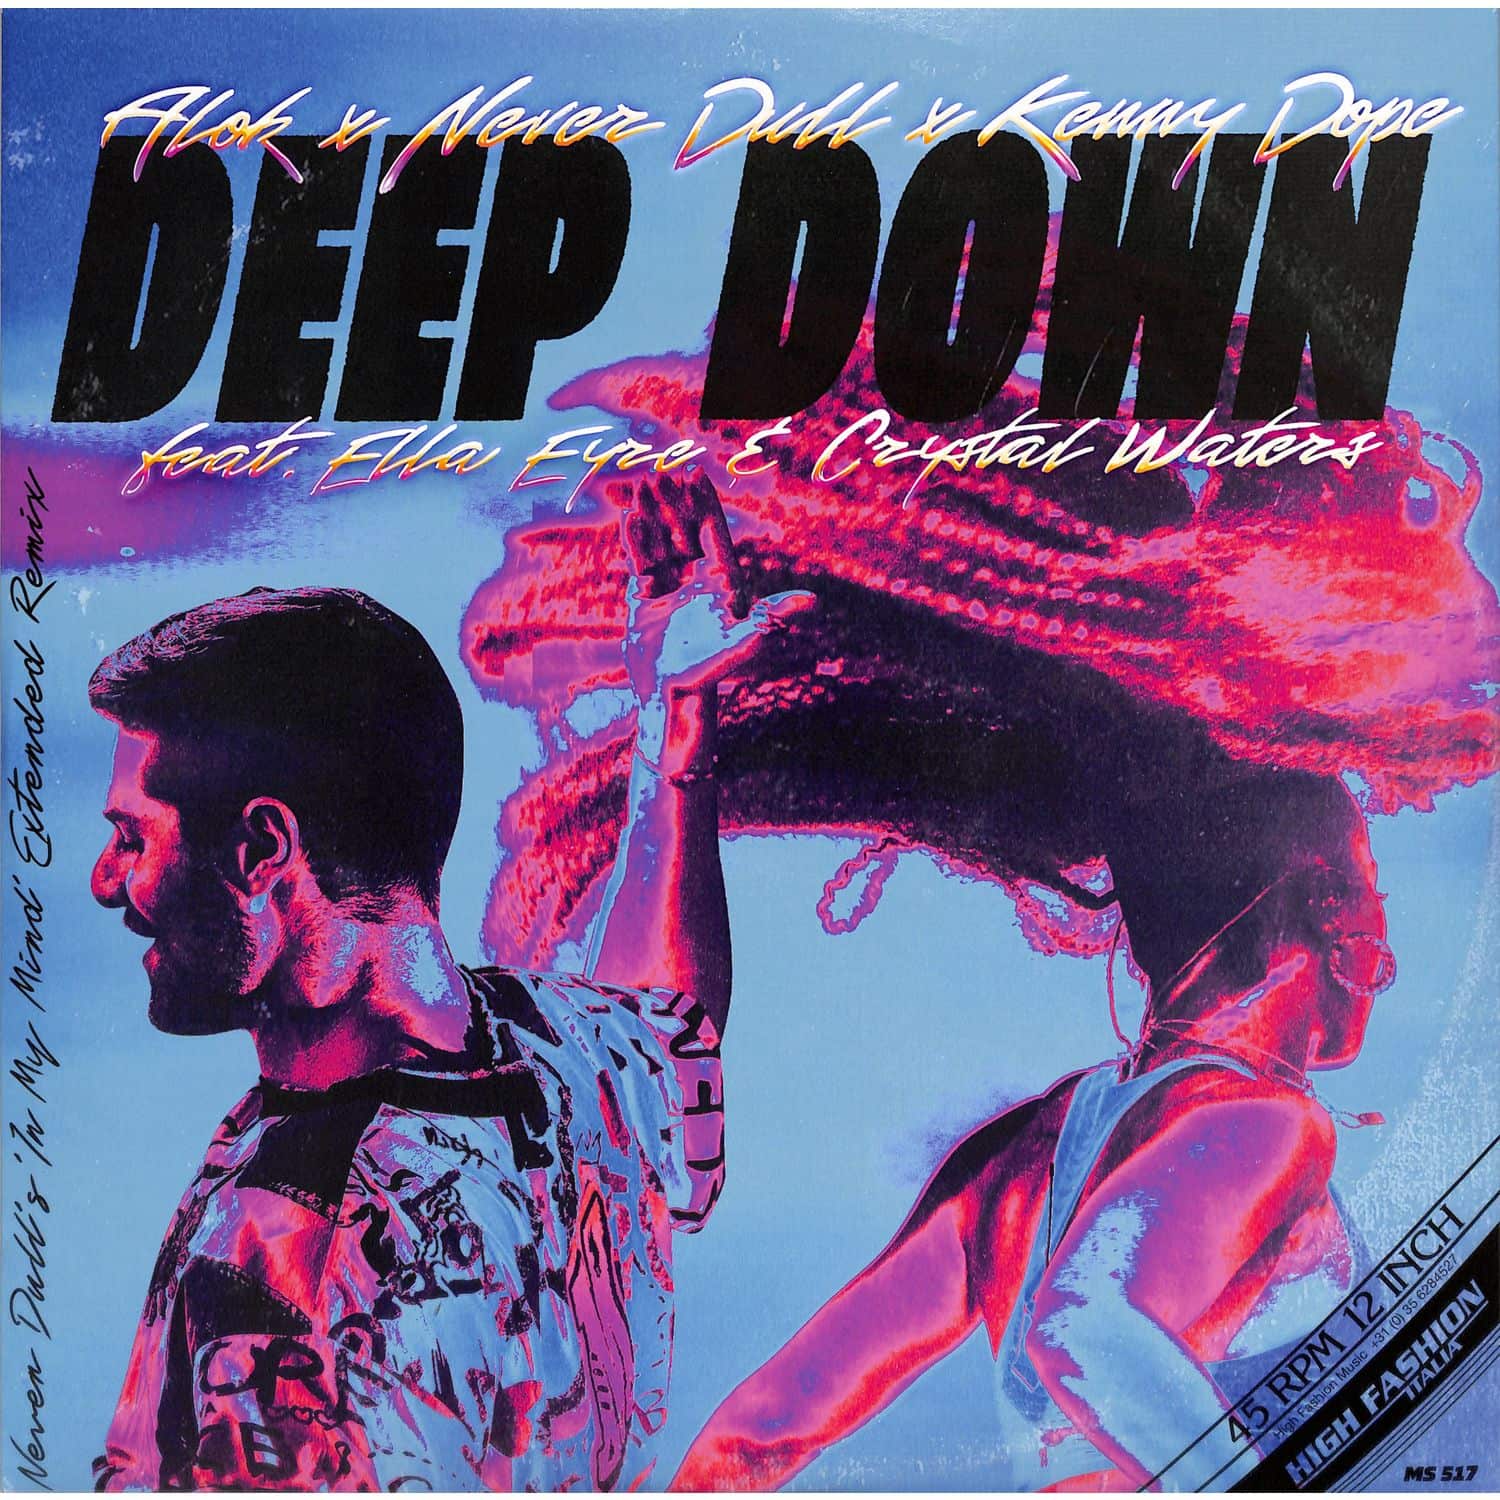 Alok, Never Dull, Kenny Dope Feat. Ella Eyre & Crystal Waters - DEEP DOWN